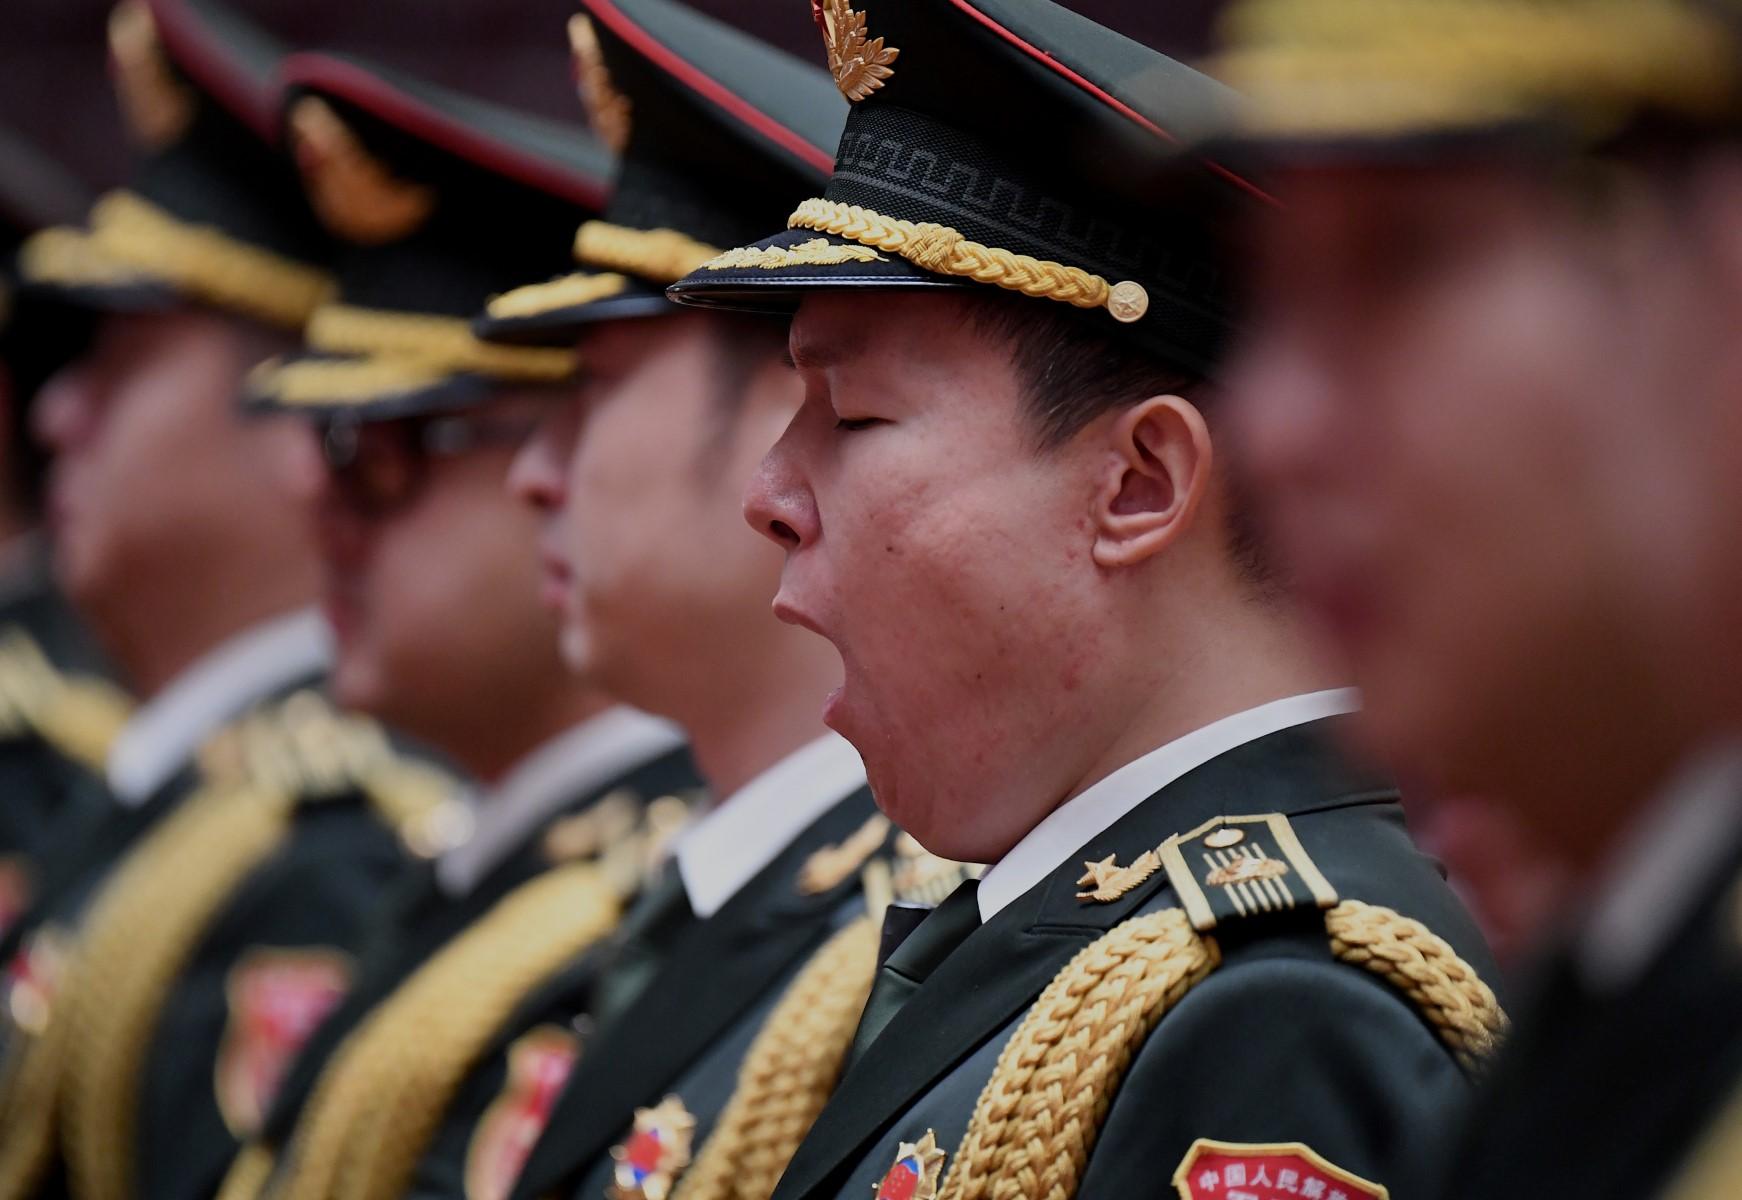 A member of the military band yawns before the start of the commemoration of the 110th anniversary of the Xinhai Revolution. There are growing global concerns about China's military modernisation. Photo: AFP